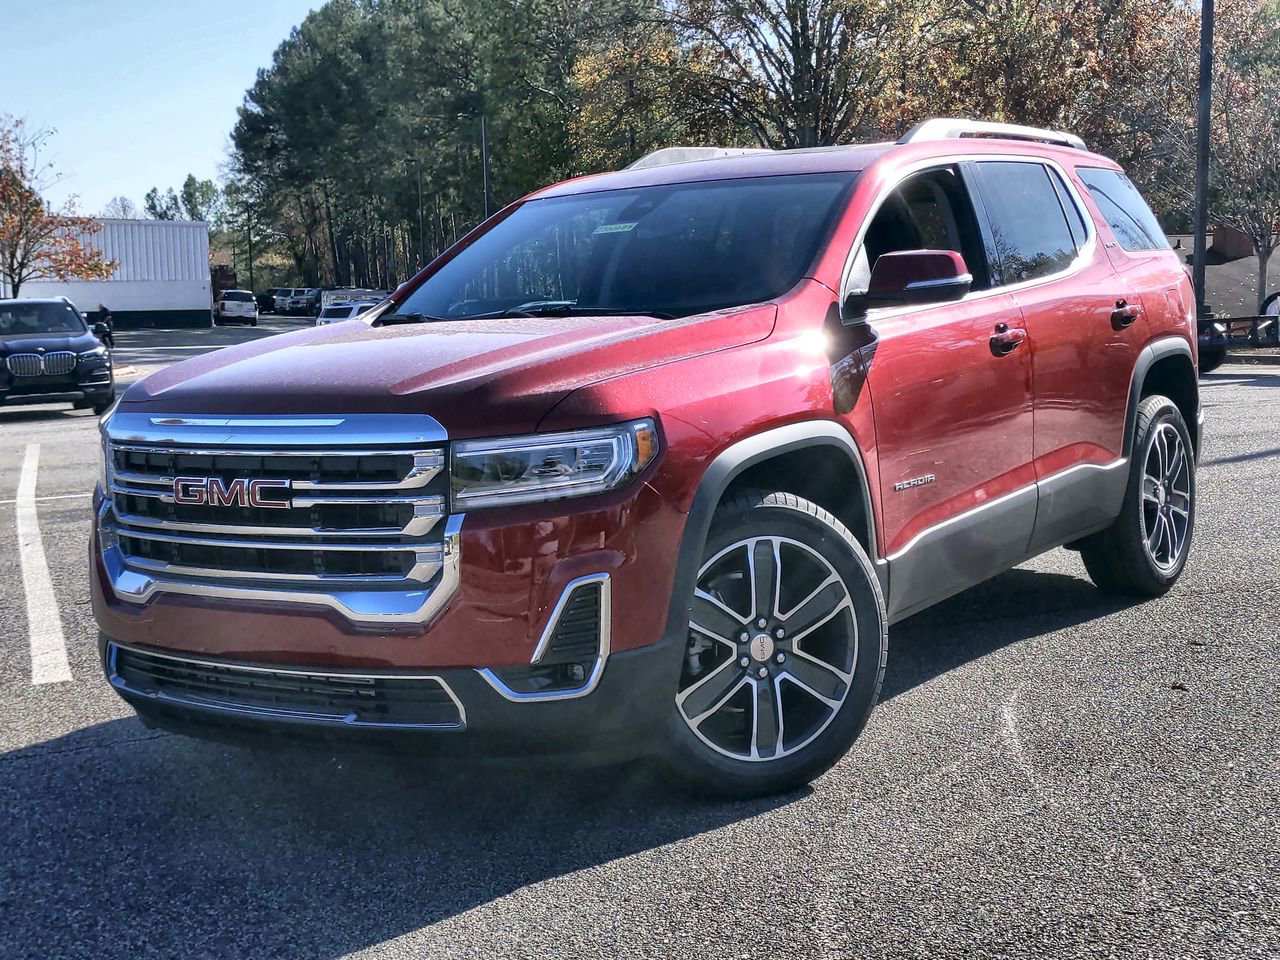 GMC Black Friday Sales Event Find your GMC at Carl Black Kennesaw